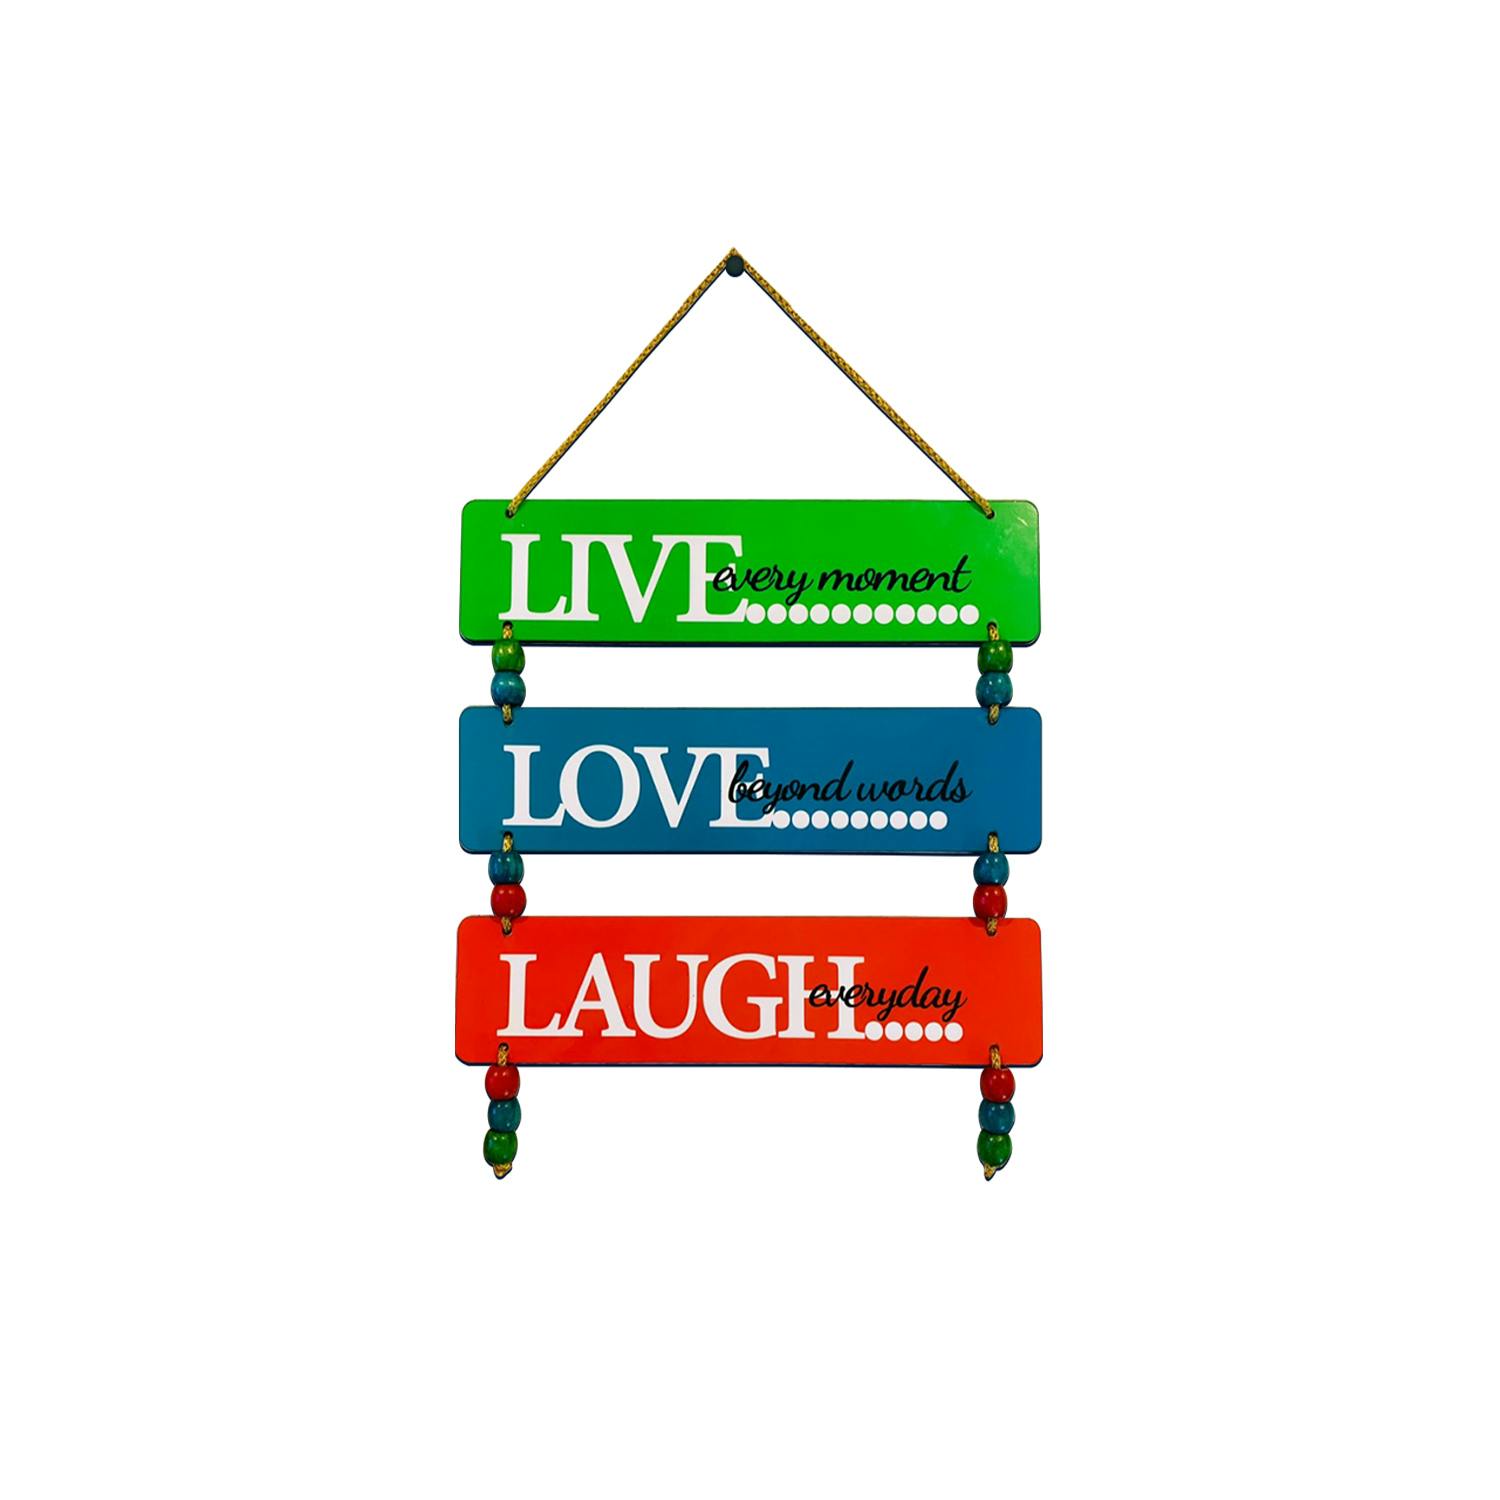 Live, Love, Laugh: Add Inspirational Charm to Your Home with this Wall Hanging!